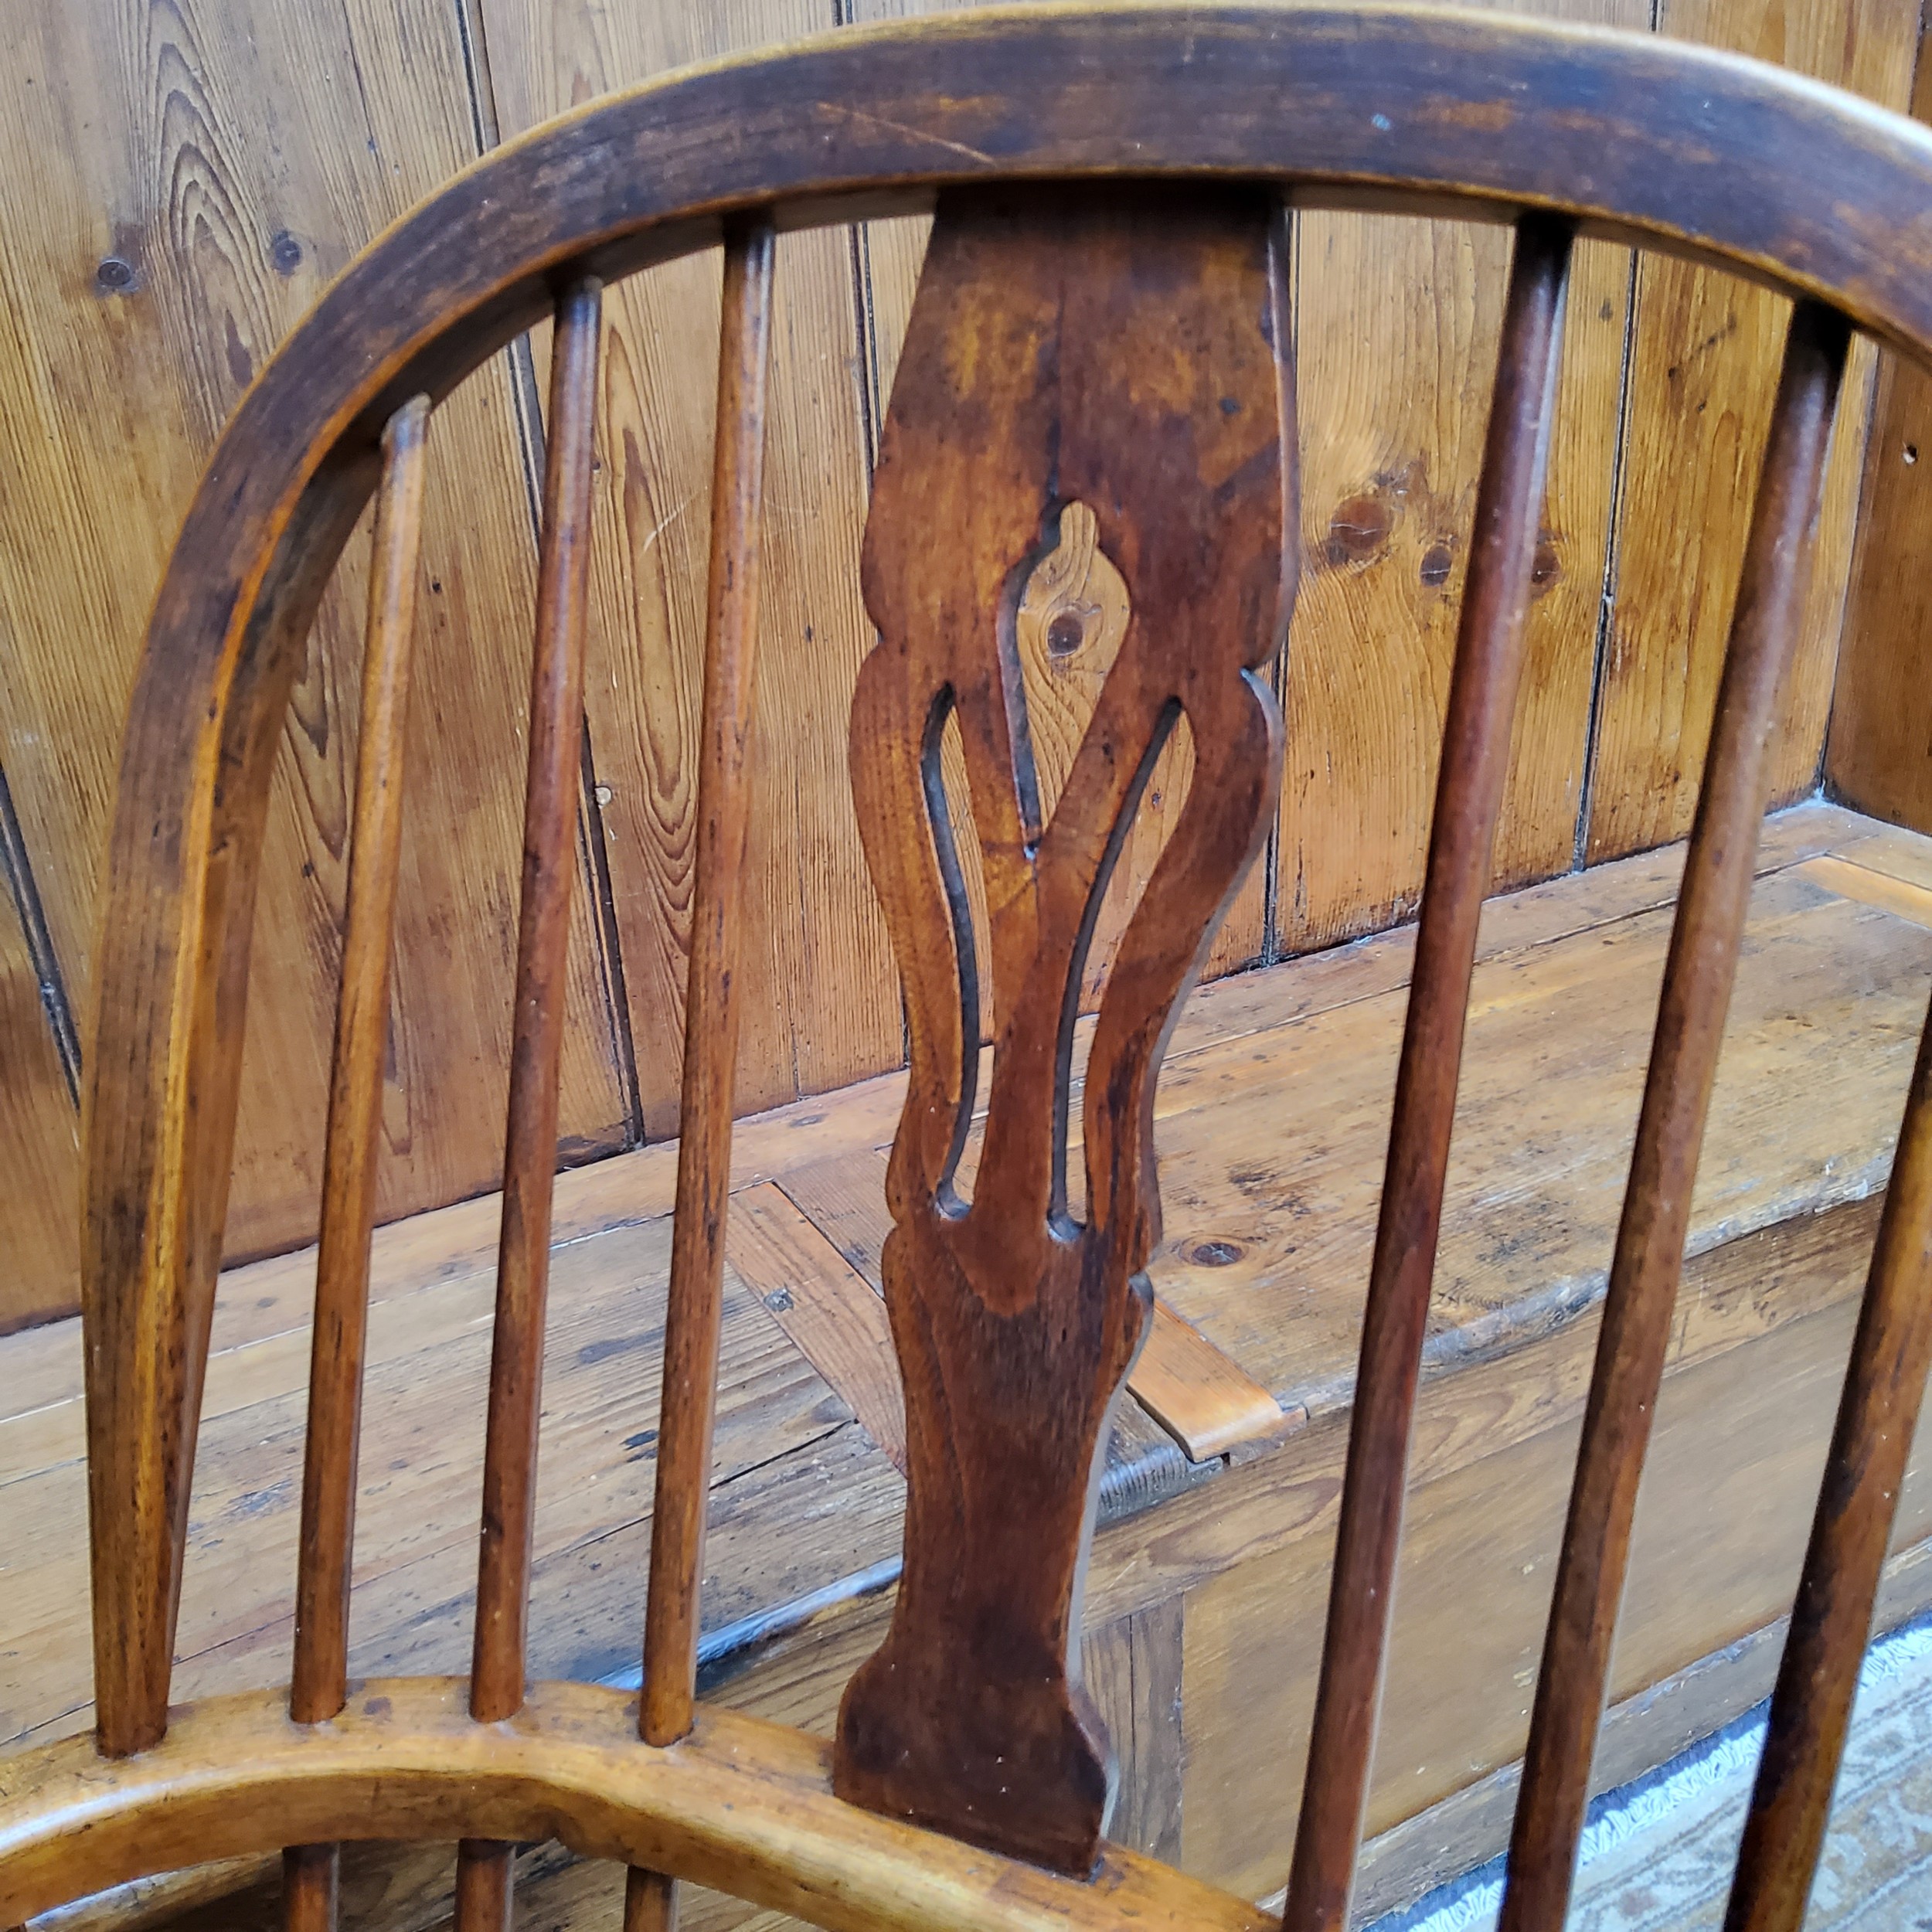 An early 19th century ash and elm Windsor chair with crinoline stretcher c.1820 - Image 2 of 2